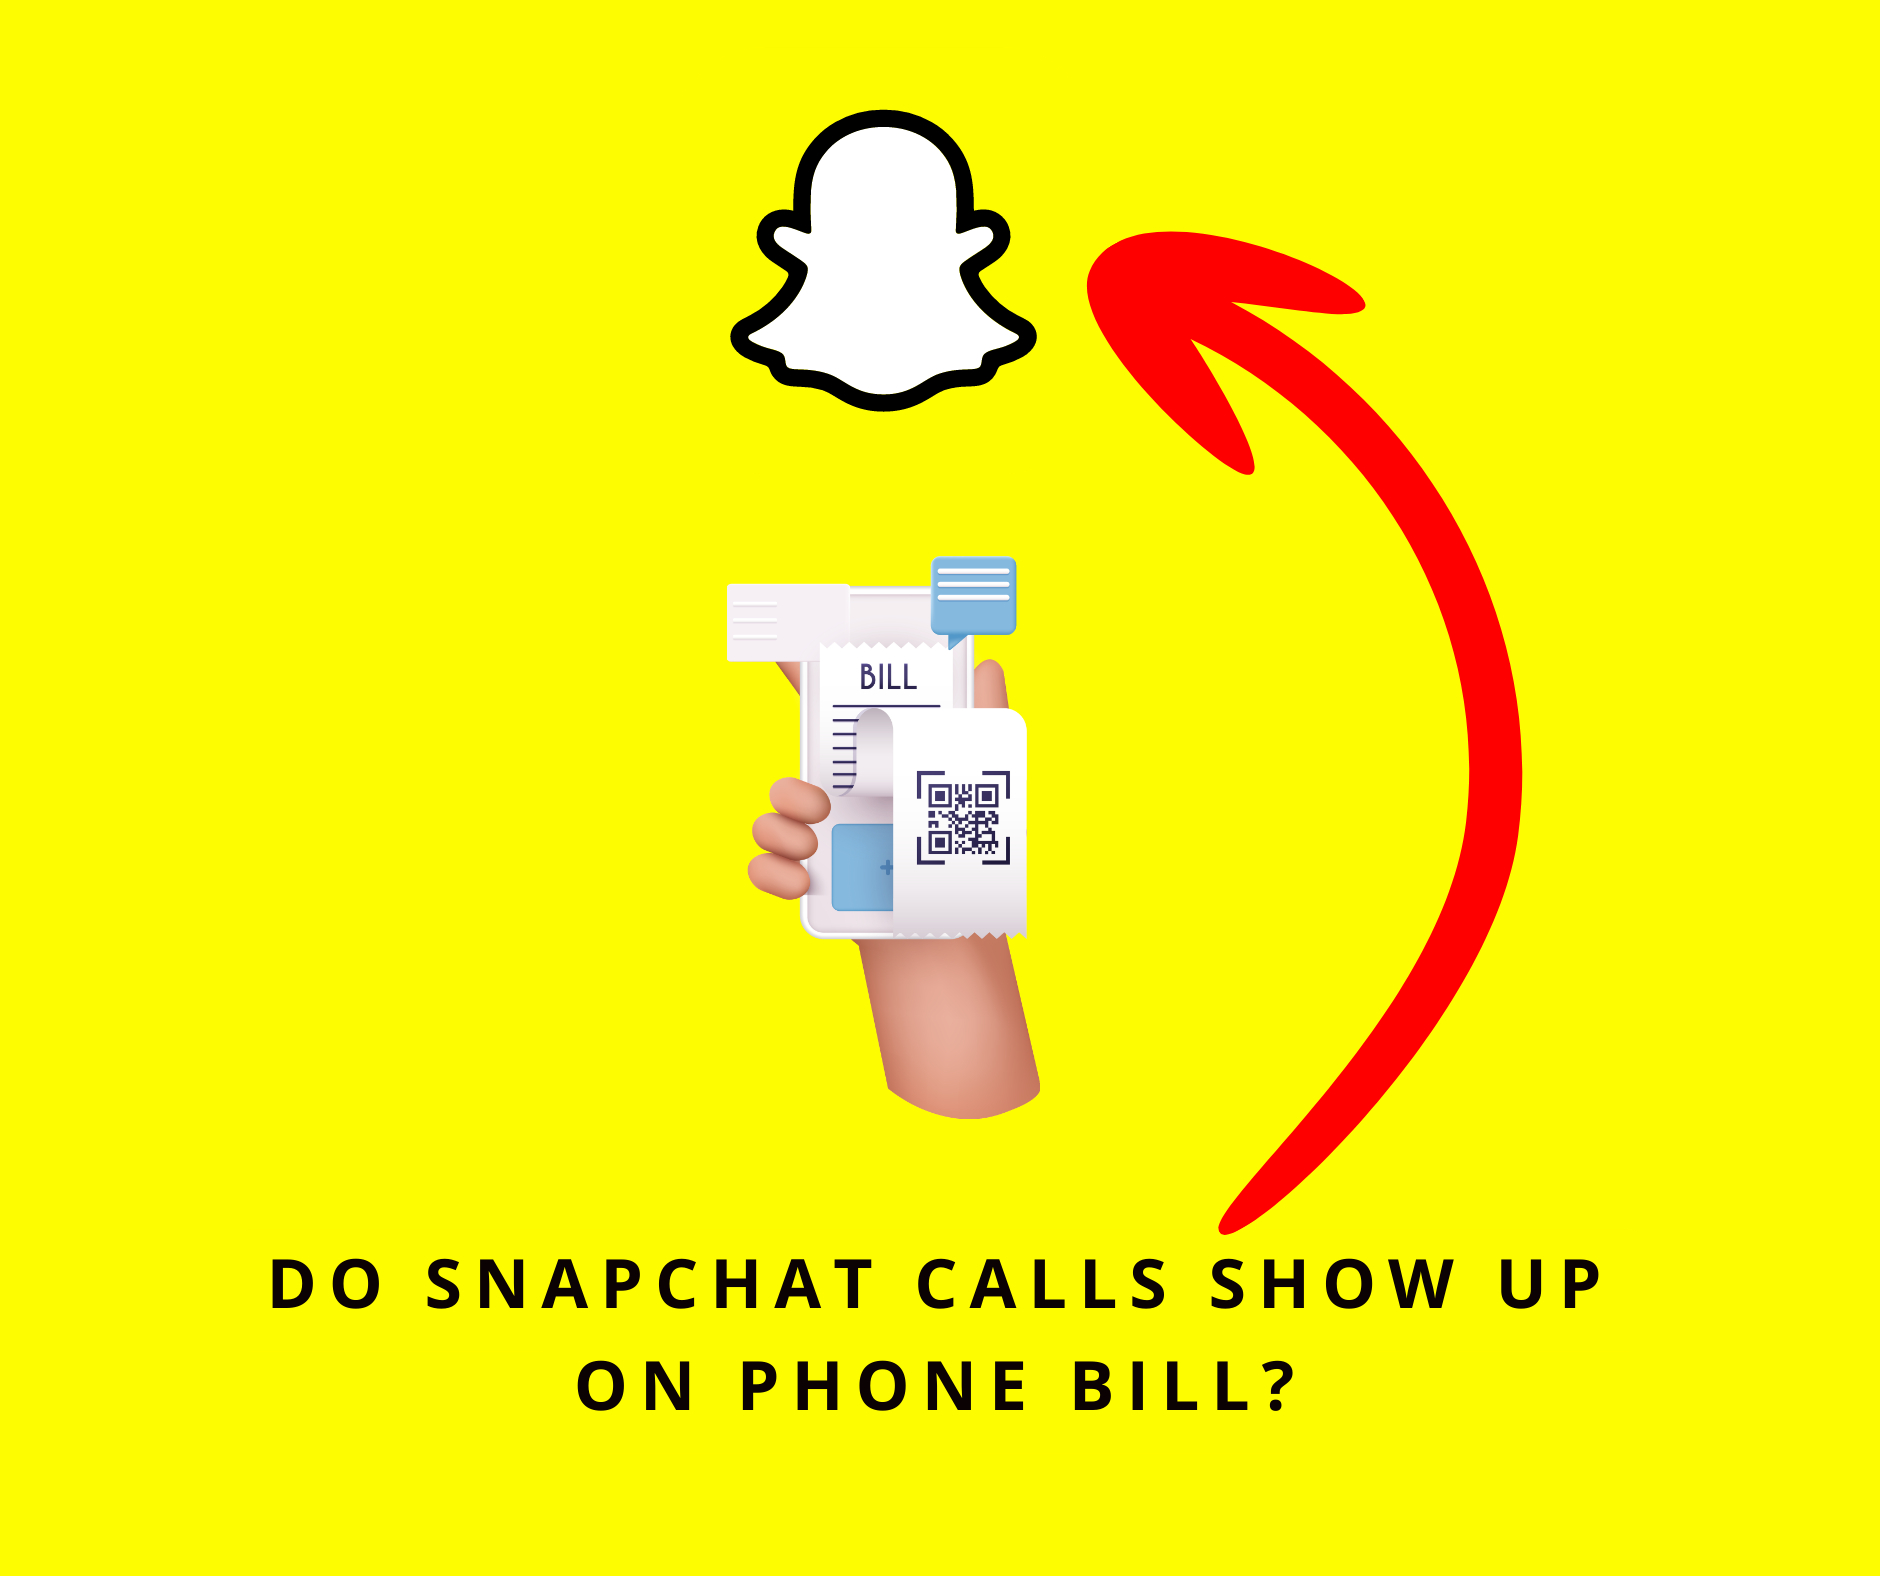 Do Snapchat Calls Show Up on Phone Bill?